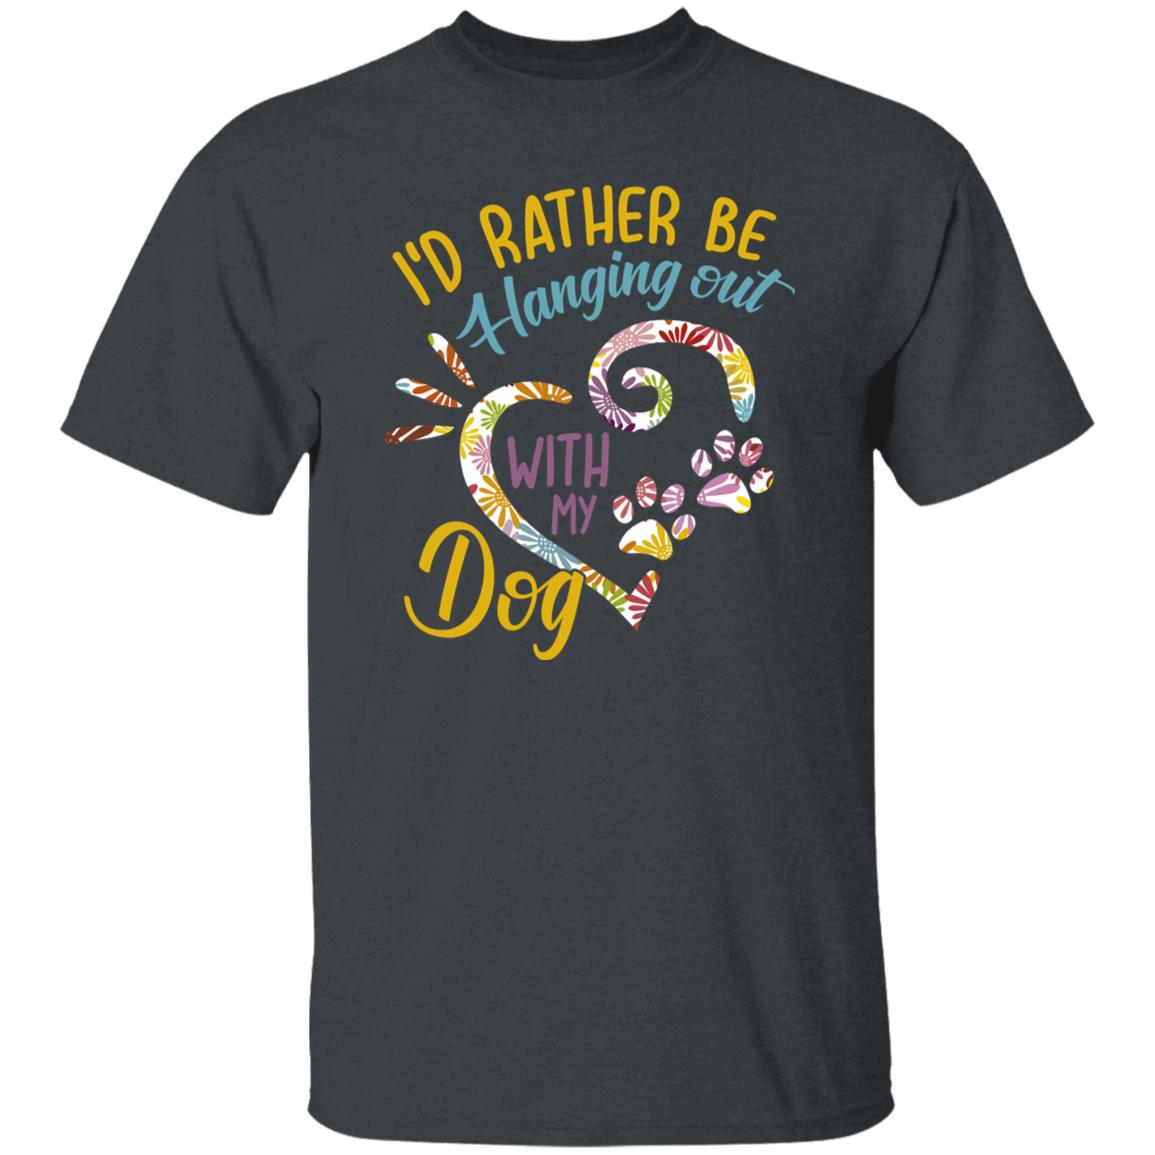 I'd rather be hanging out with my dog Unisex t-shirt gift black navy dark heather-Family-Gift-Planet